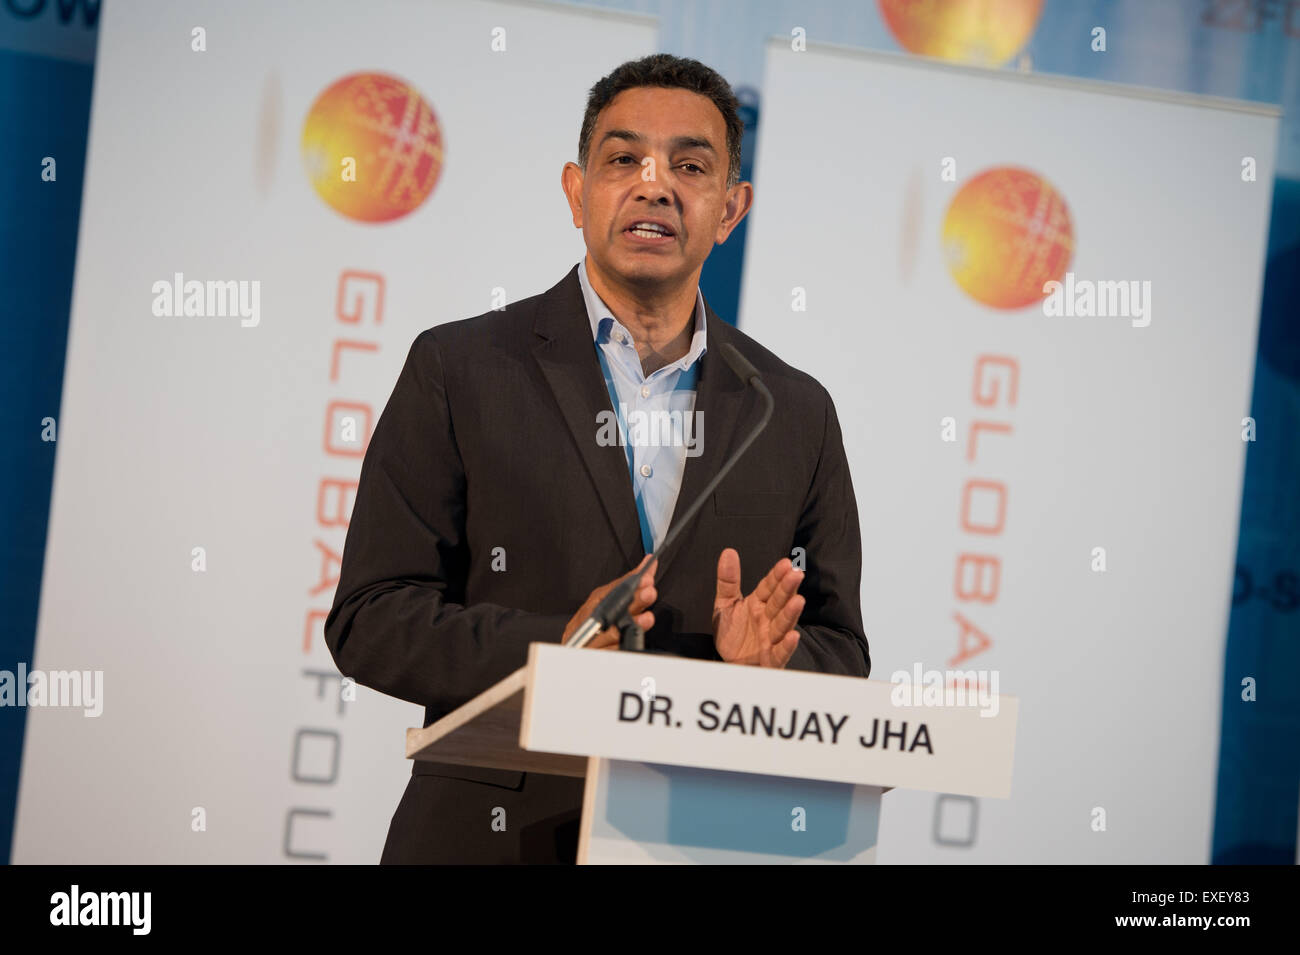 Dresden, Germany. 13th July, 2015. The CEO of Globalfoundries, Sanjay Jha, speaks during a press conference in Dresden, Germany, 13 July 2015. At the press conferenfce the new semi-conductor '22FDX' technology was introduced. Globalfoundaries plan an investment in Saxony until 2017 of around 250 million US dollars for the introduction of the technology-development and the subsequent enlargement of their productions capacity Photo: ARNO BURGI/dpa/Alamy Live News Stock Photo